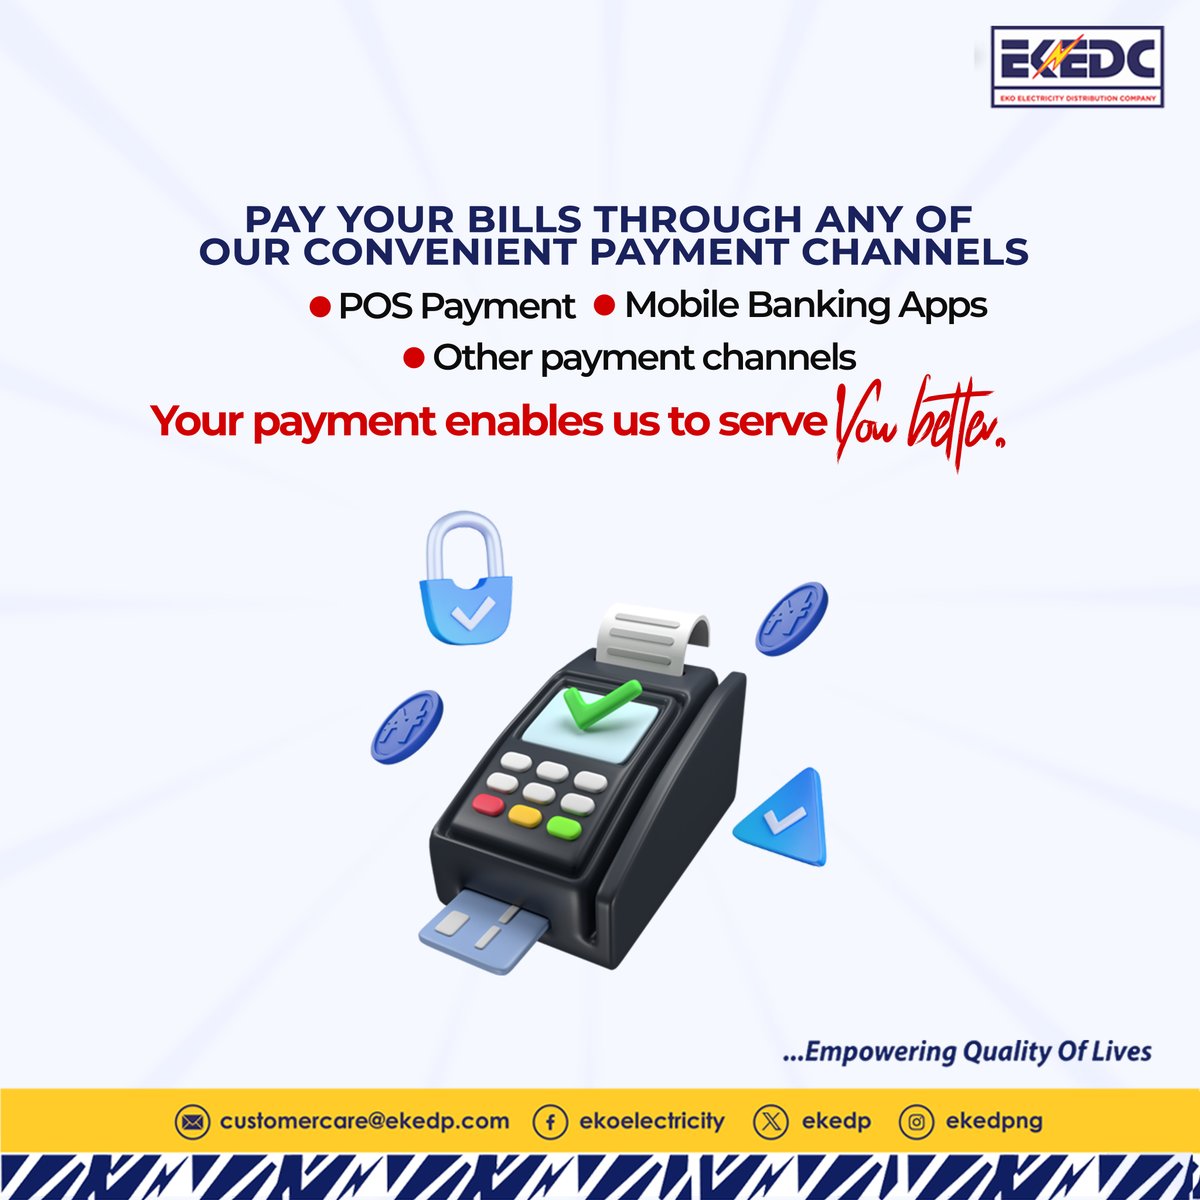 Without your payments, we are unable to make infrastructural developments to enable us serve you better. Pay your bills with any of our easy and convenient options to help us keep up a good work. #EKEDC #EmpoweringQualityofLives #BillPayment